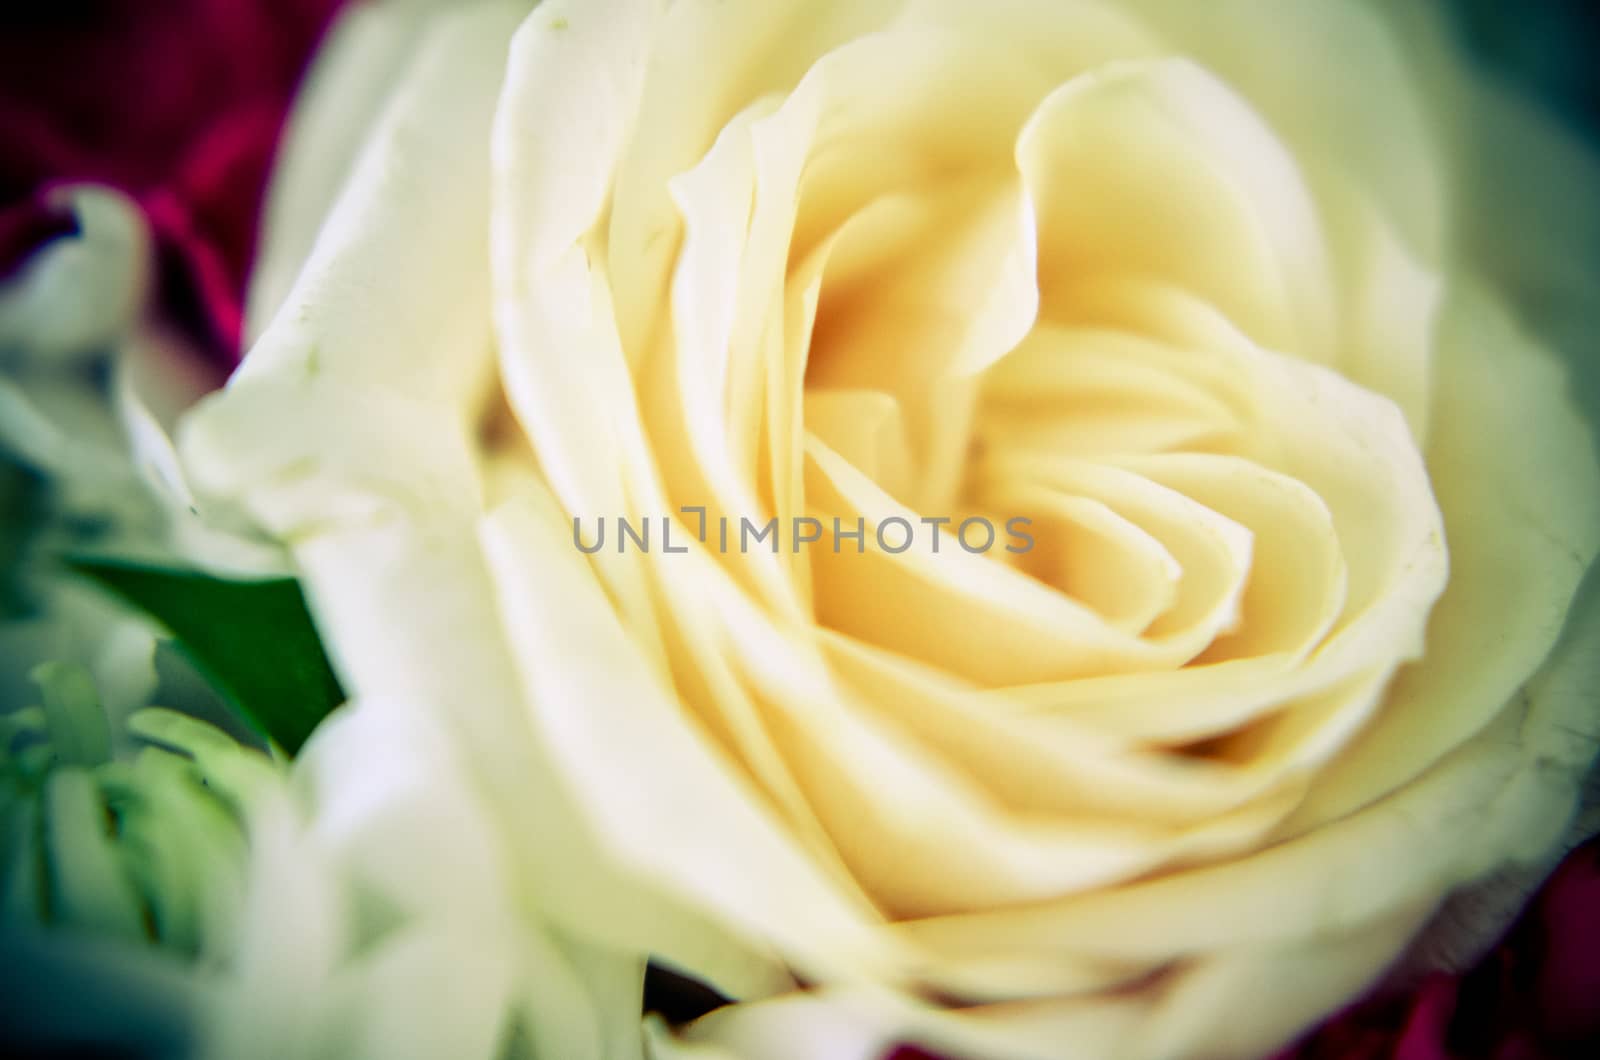 White rose closeup. Background of flowers buds and blured closeup